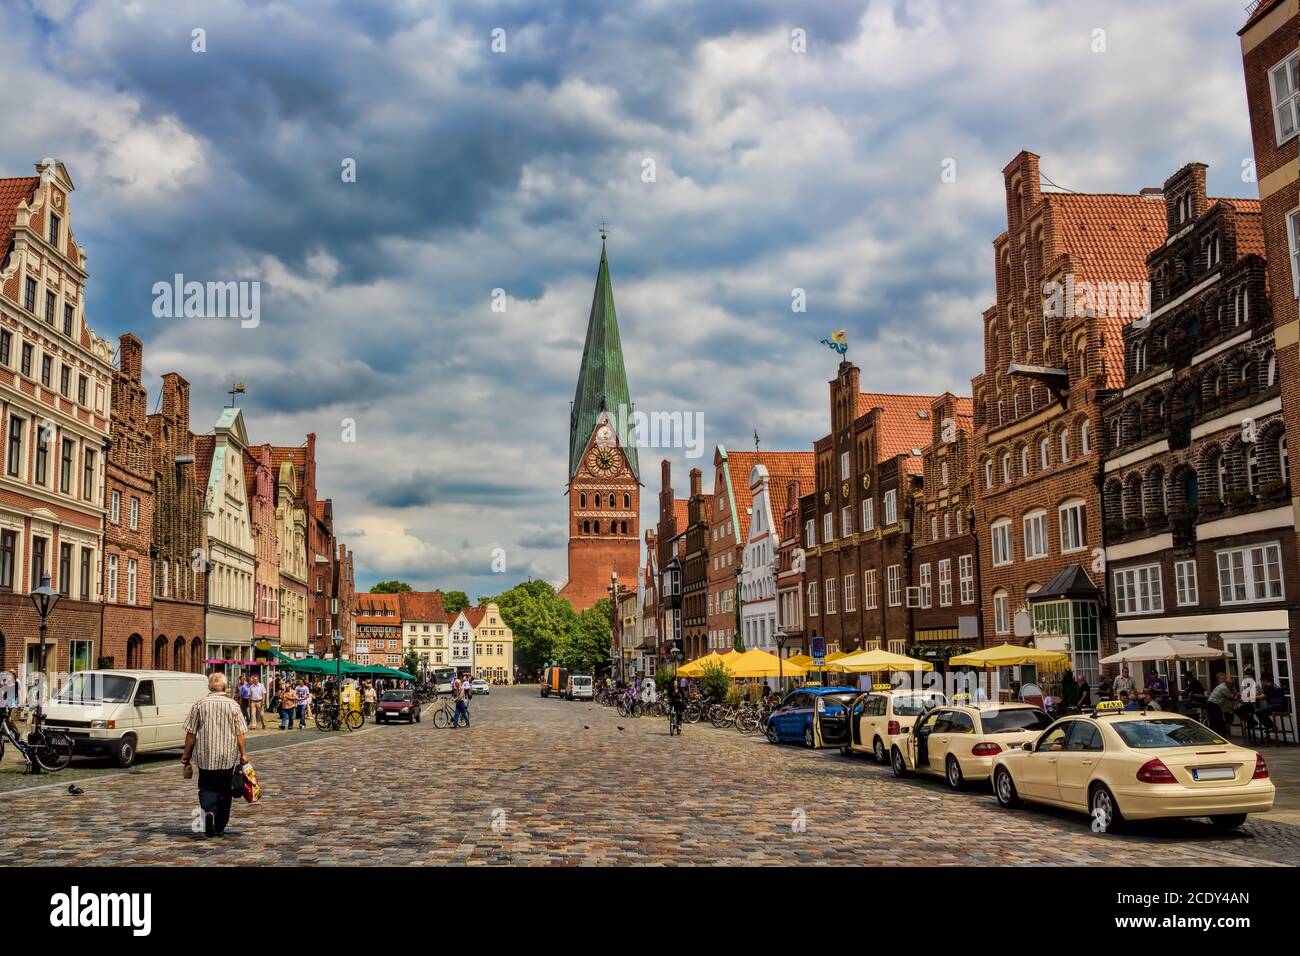 Historic old town in Lueneburg, Germany Stock Photo